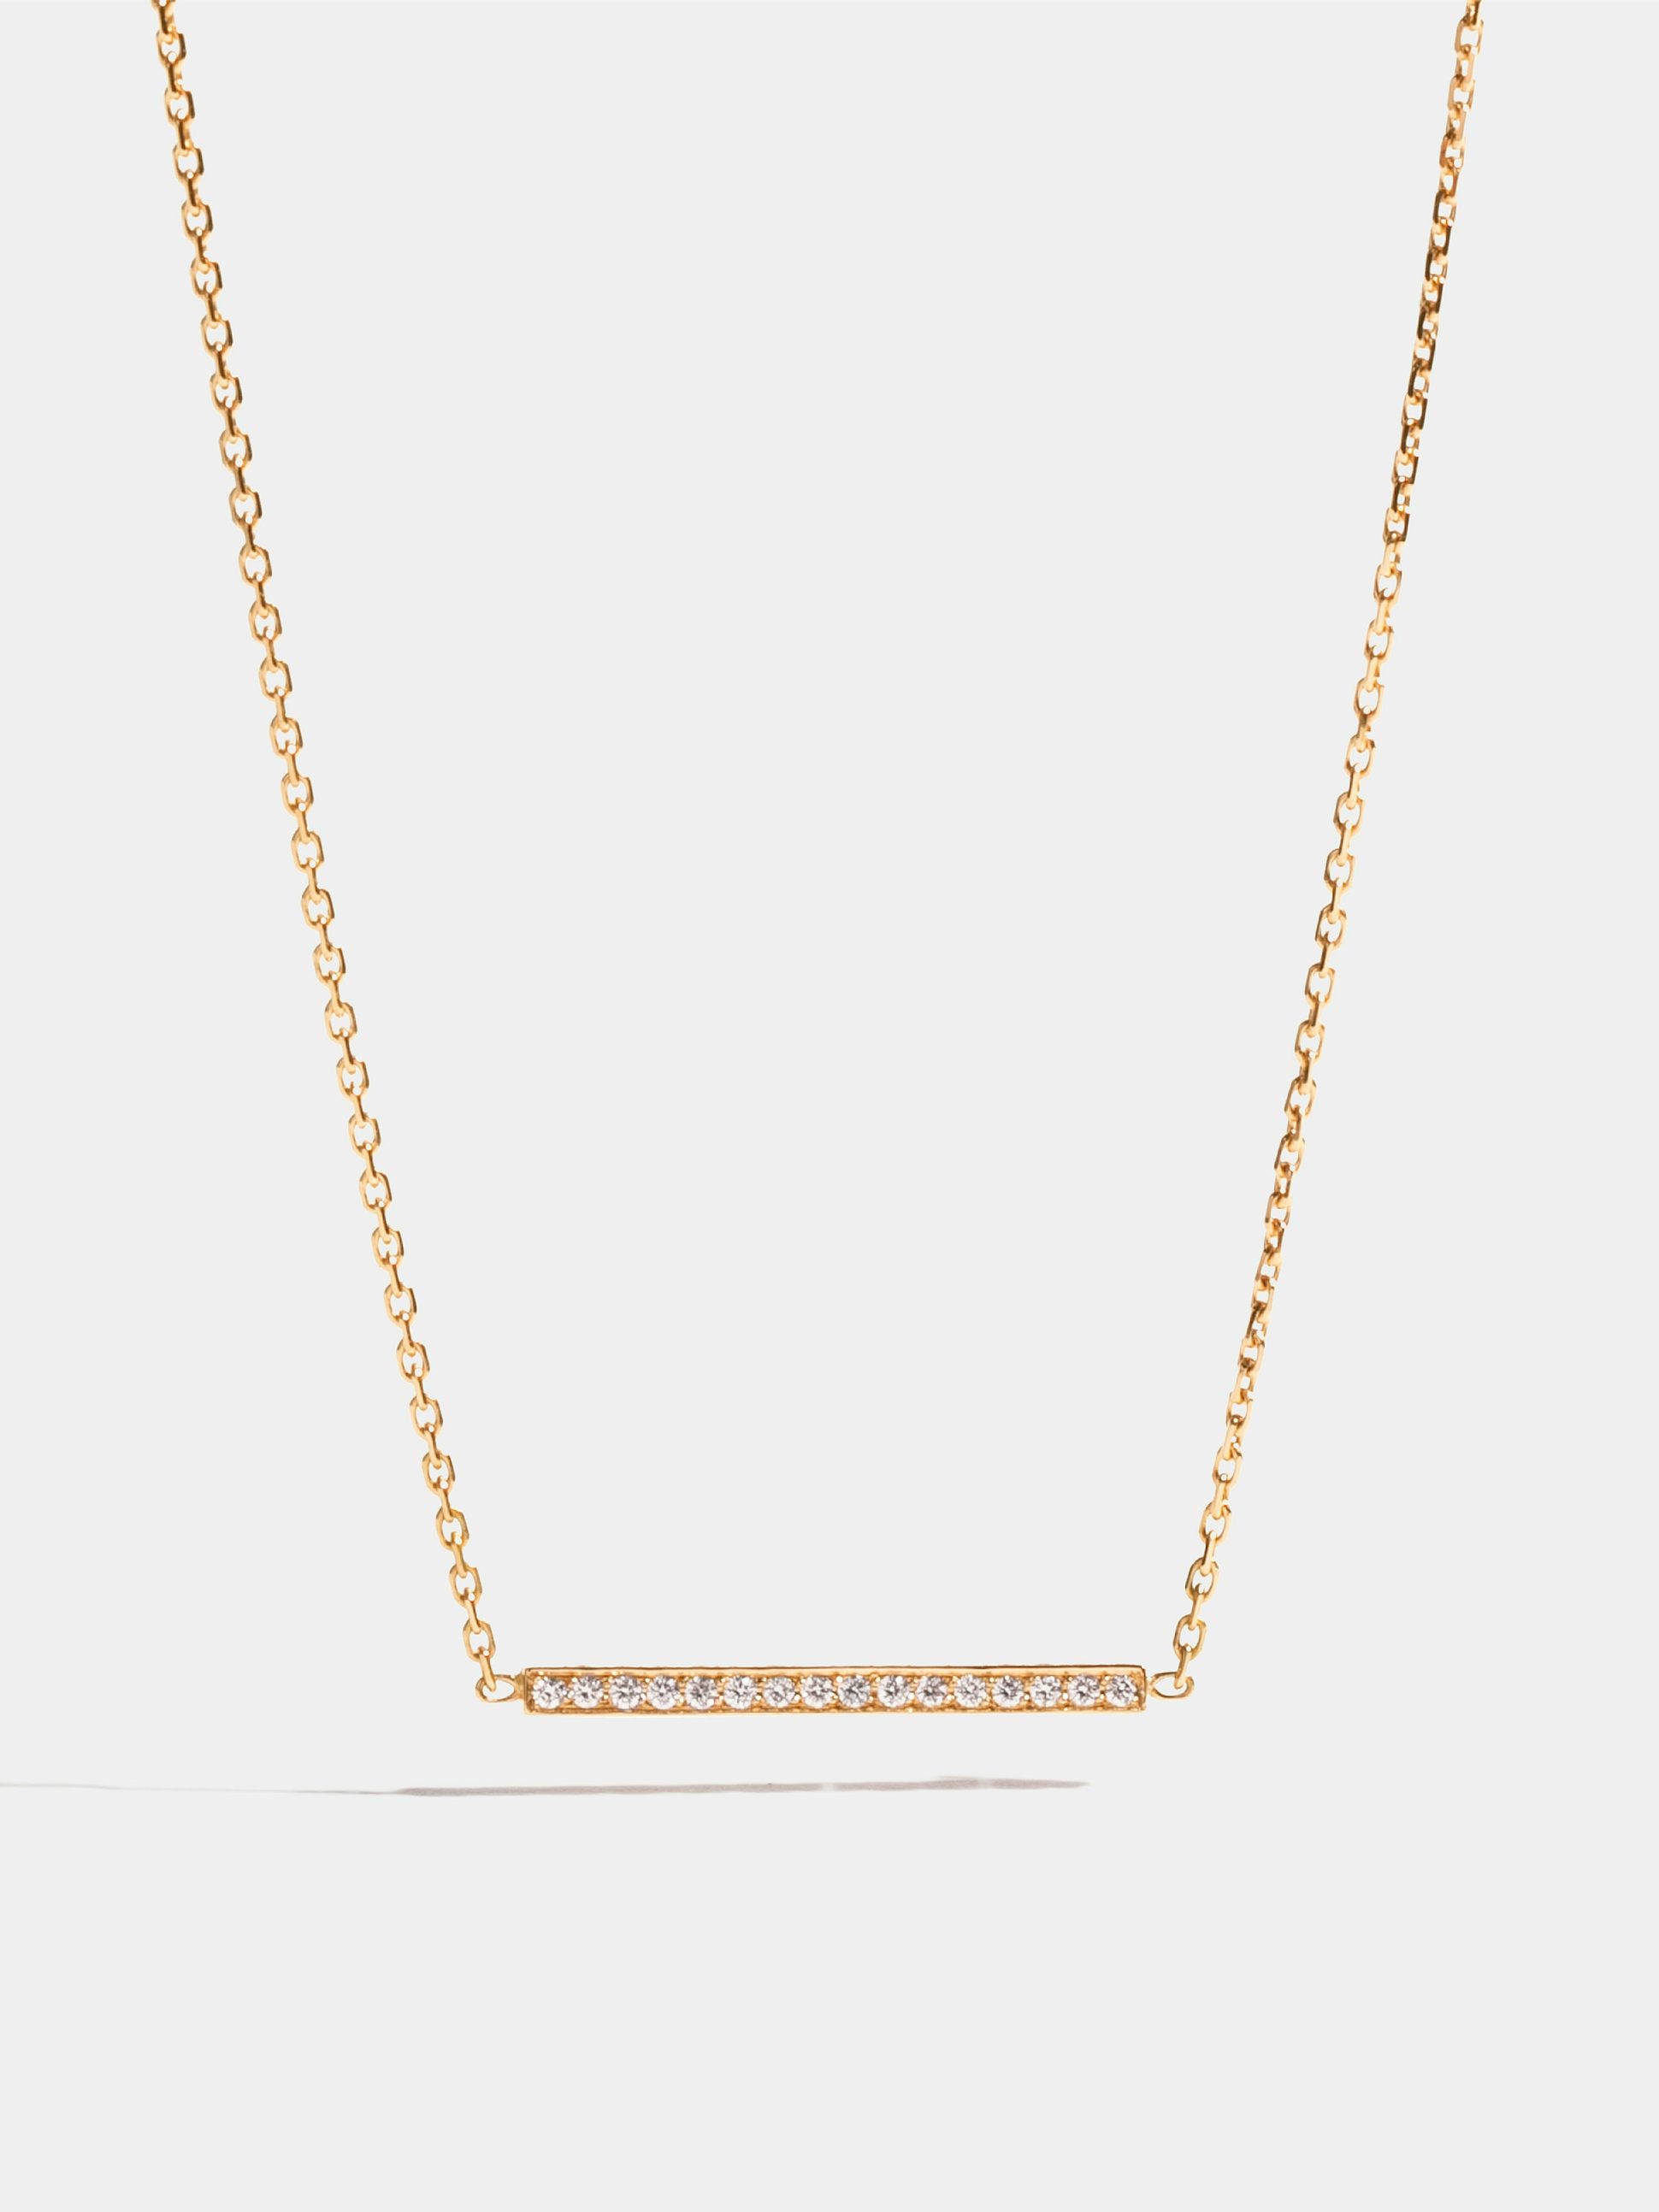 Motif Anagramme paved flat ribbon in yellow gold 18k Fairmined ethical, on 42 cm chain